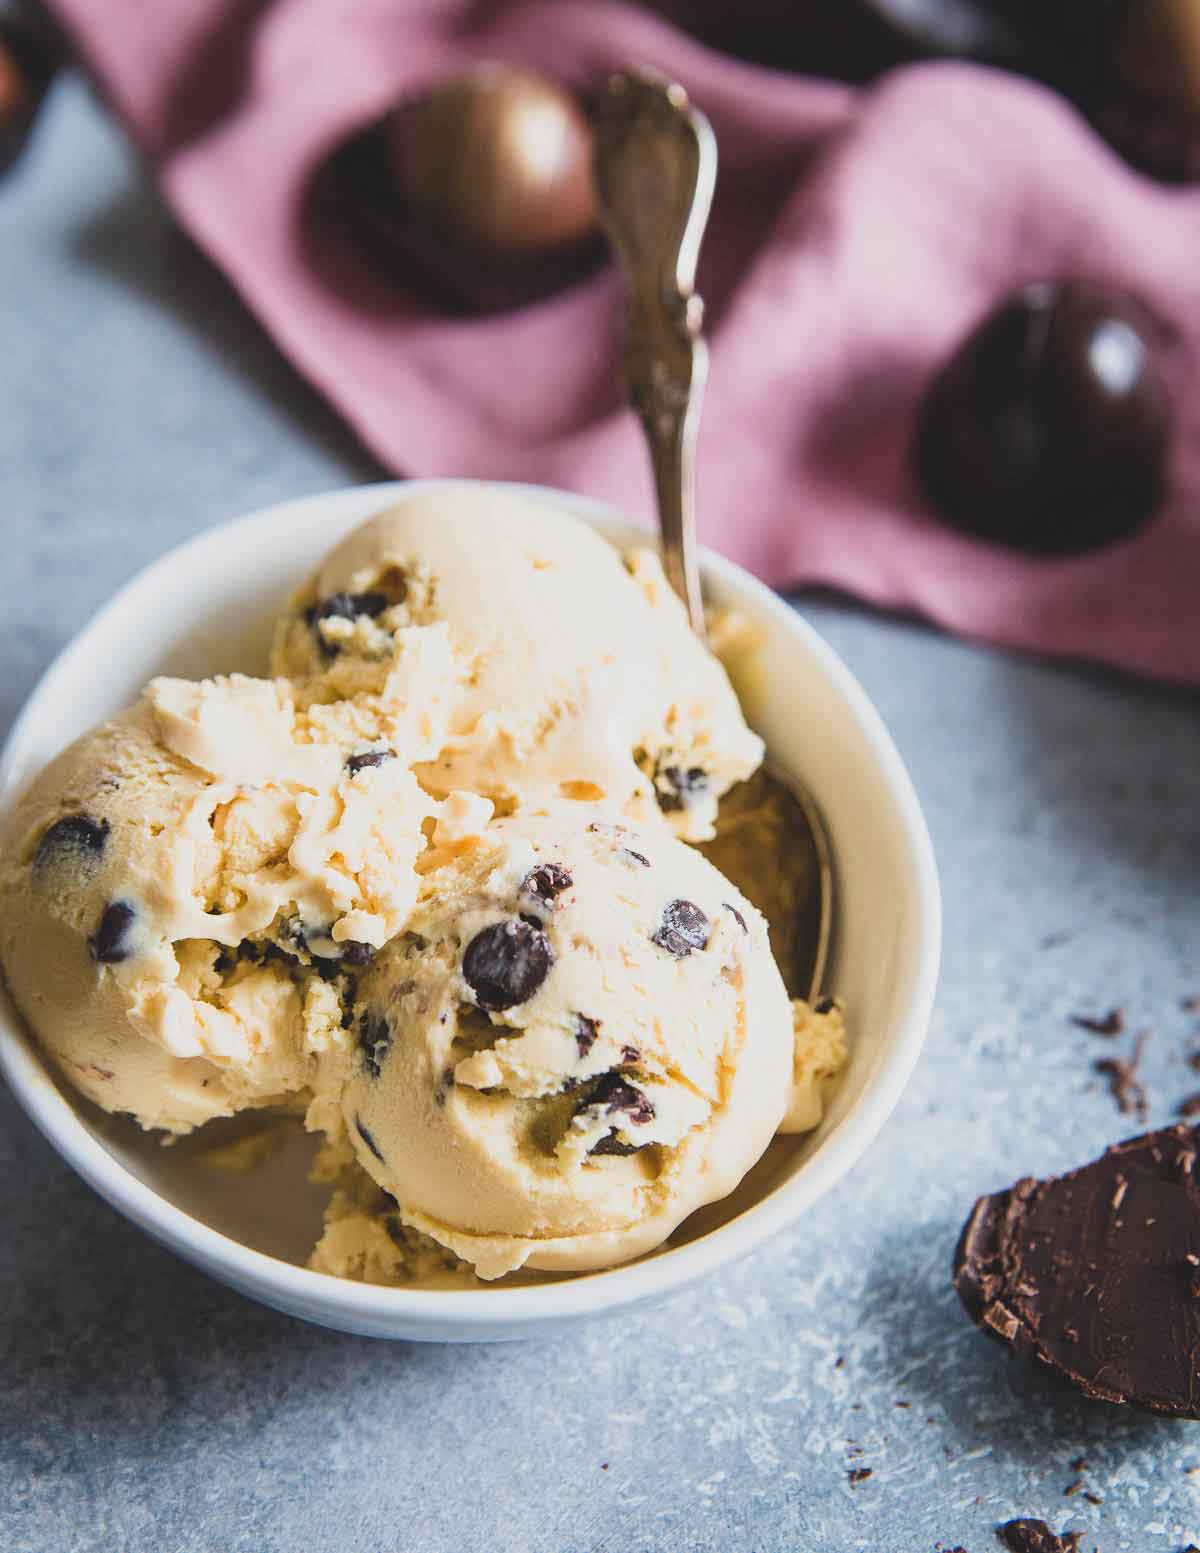 Decadent Baileys ice cream is the perfect way to celebrate St. Patrick's Day or any special occasion. It's a boozy, decadent treat studded with chocolate chips that any Irish cream lover will enjoy.